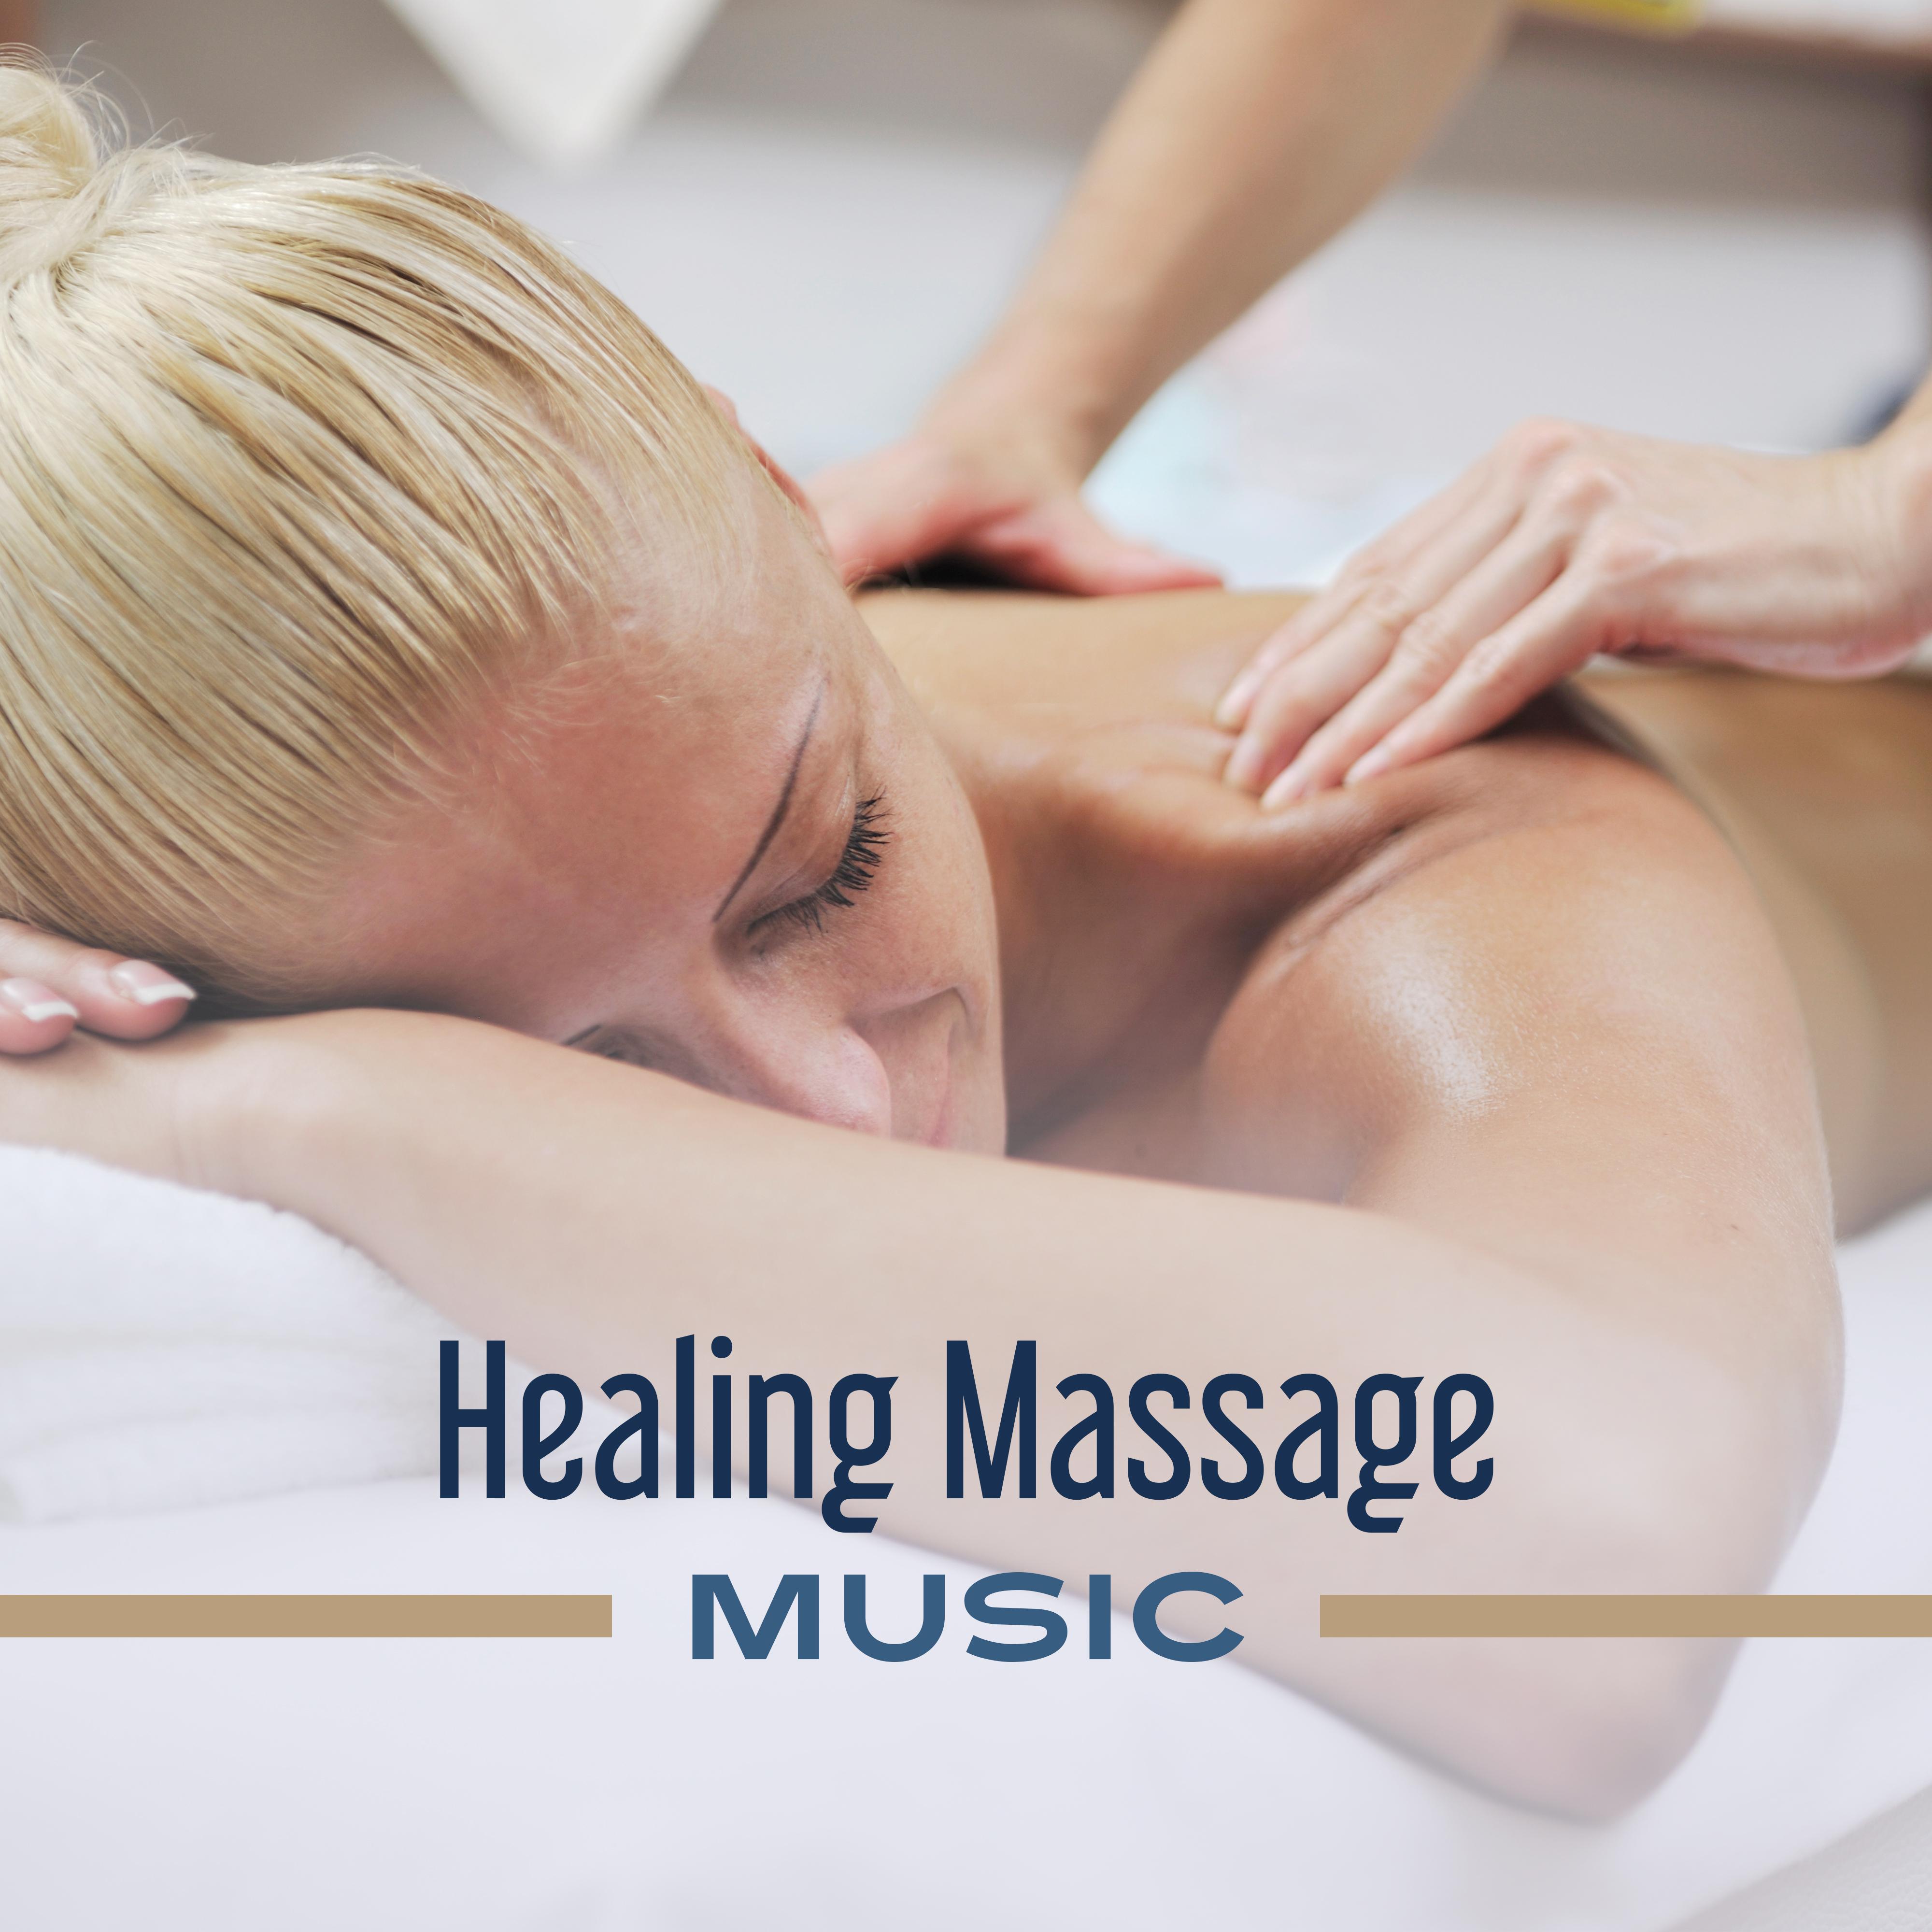 Healing Massage Music  Calm Sounds for Massage, Relax for Your Body, Rest in Spa, Nature Sounds